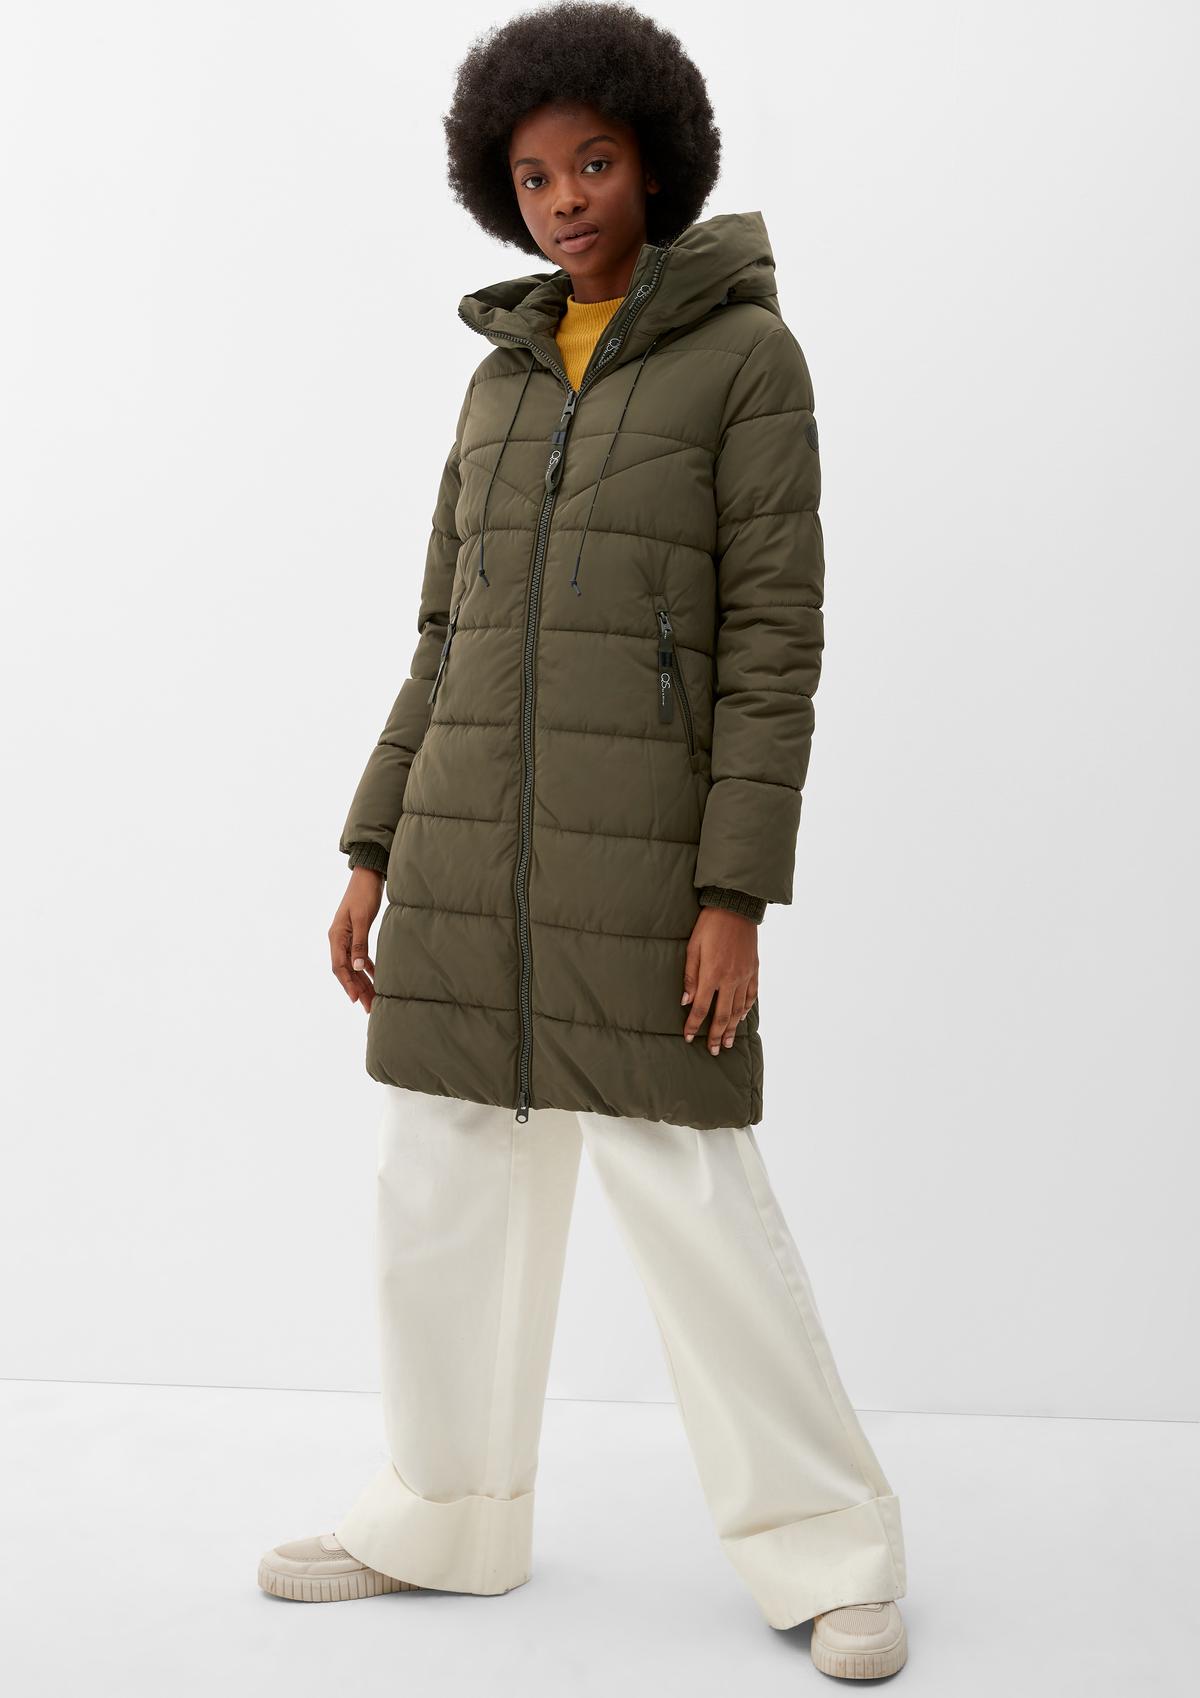 Parka with a quilted pattern